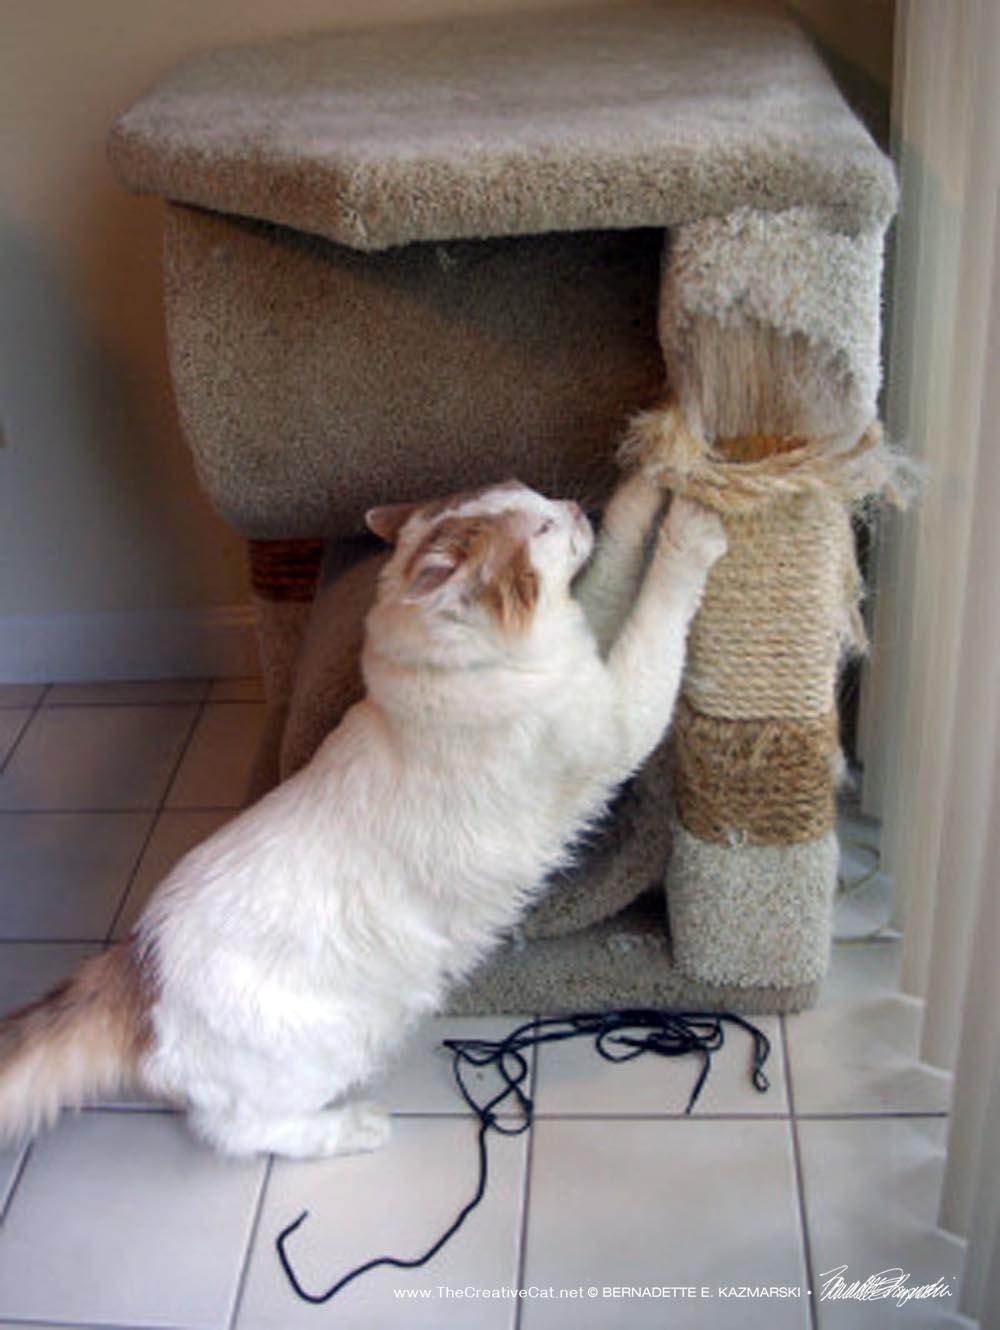 Scruffy and his scratching post by the door.